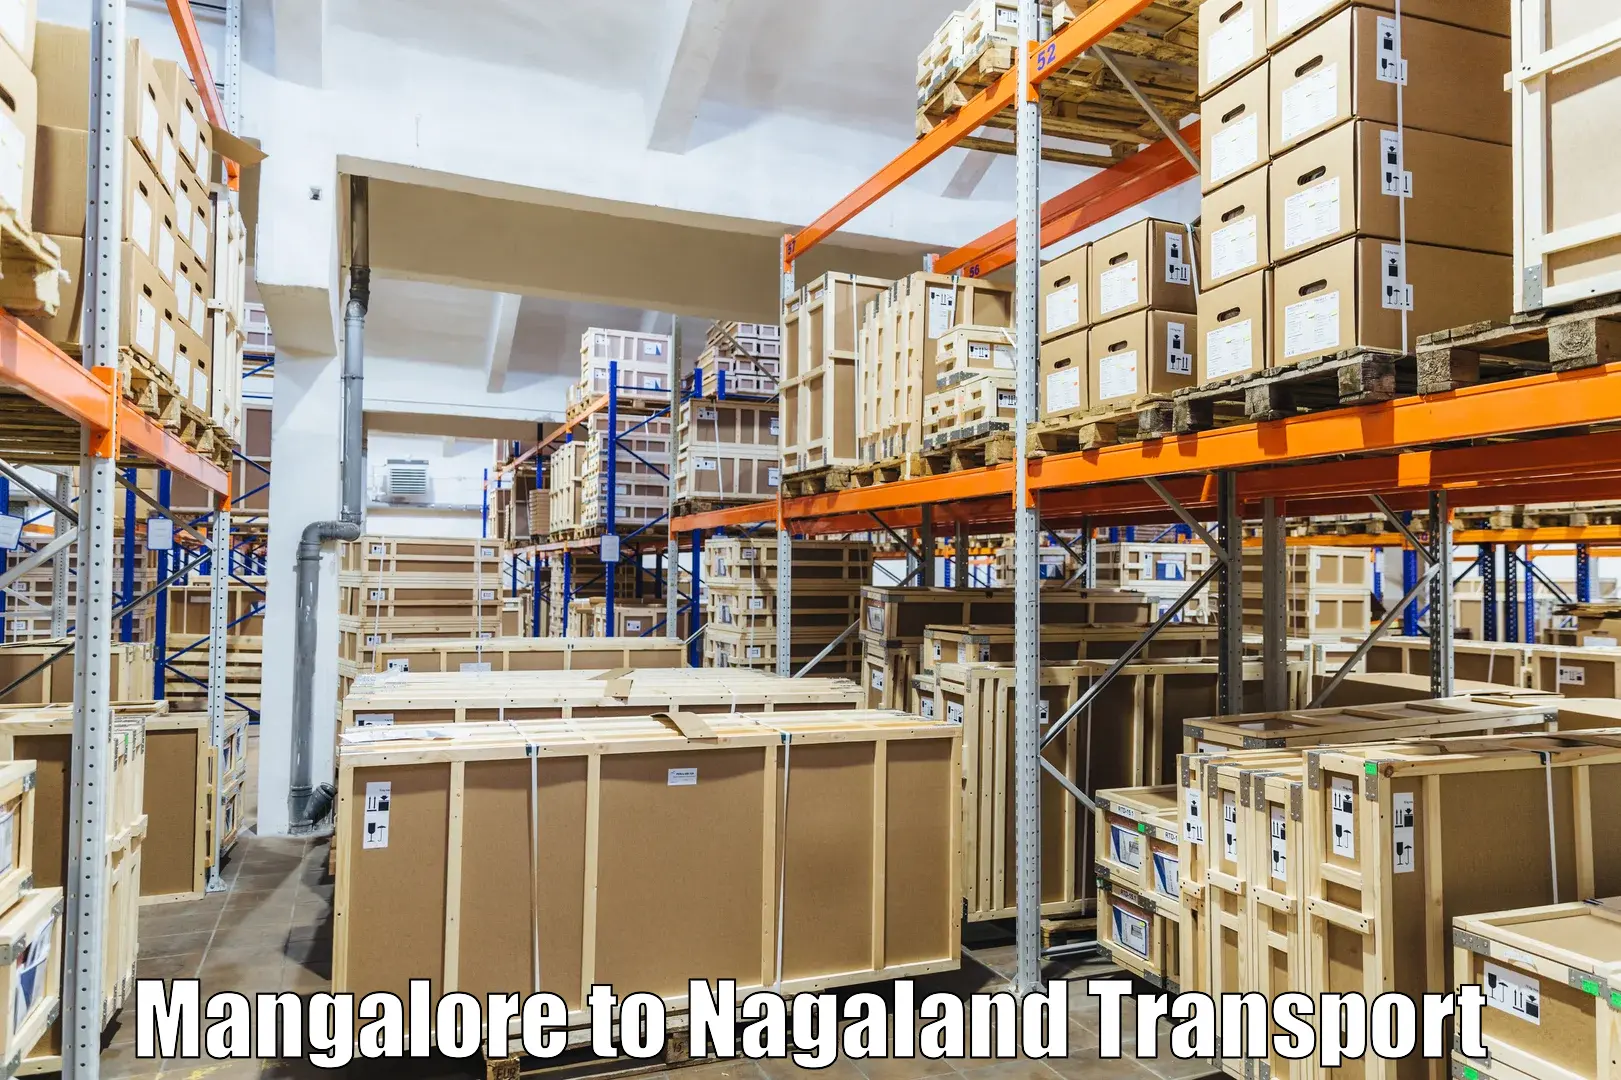 Container transport service Mangalore to Nagaland